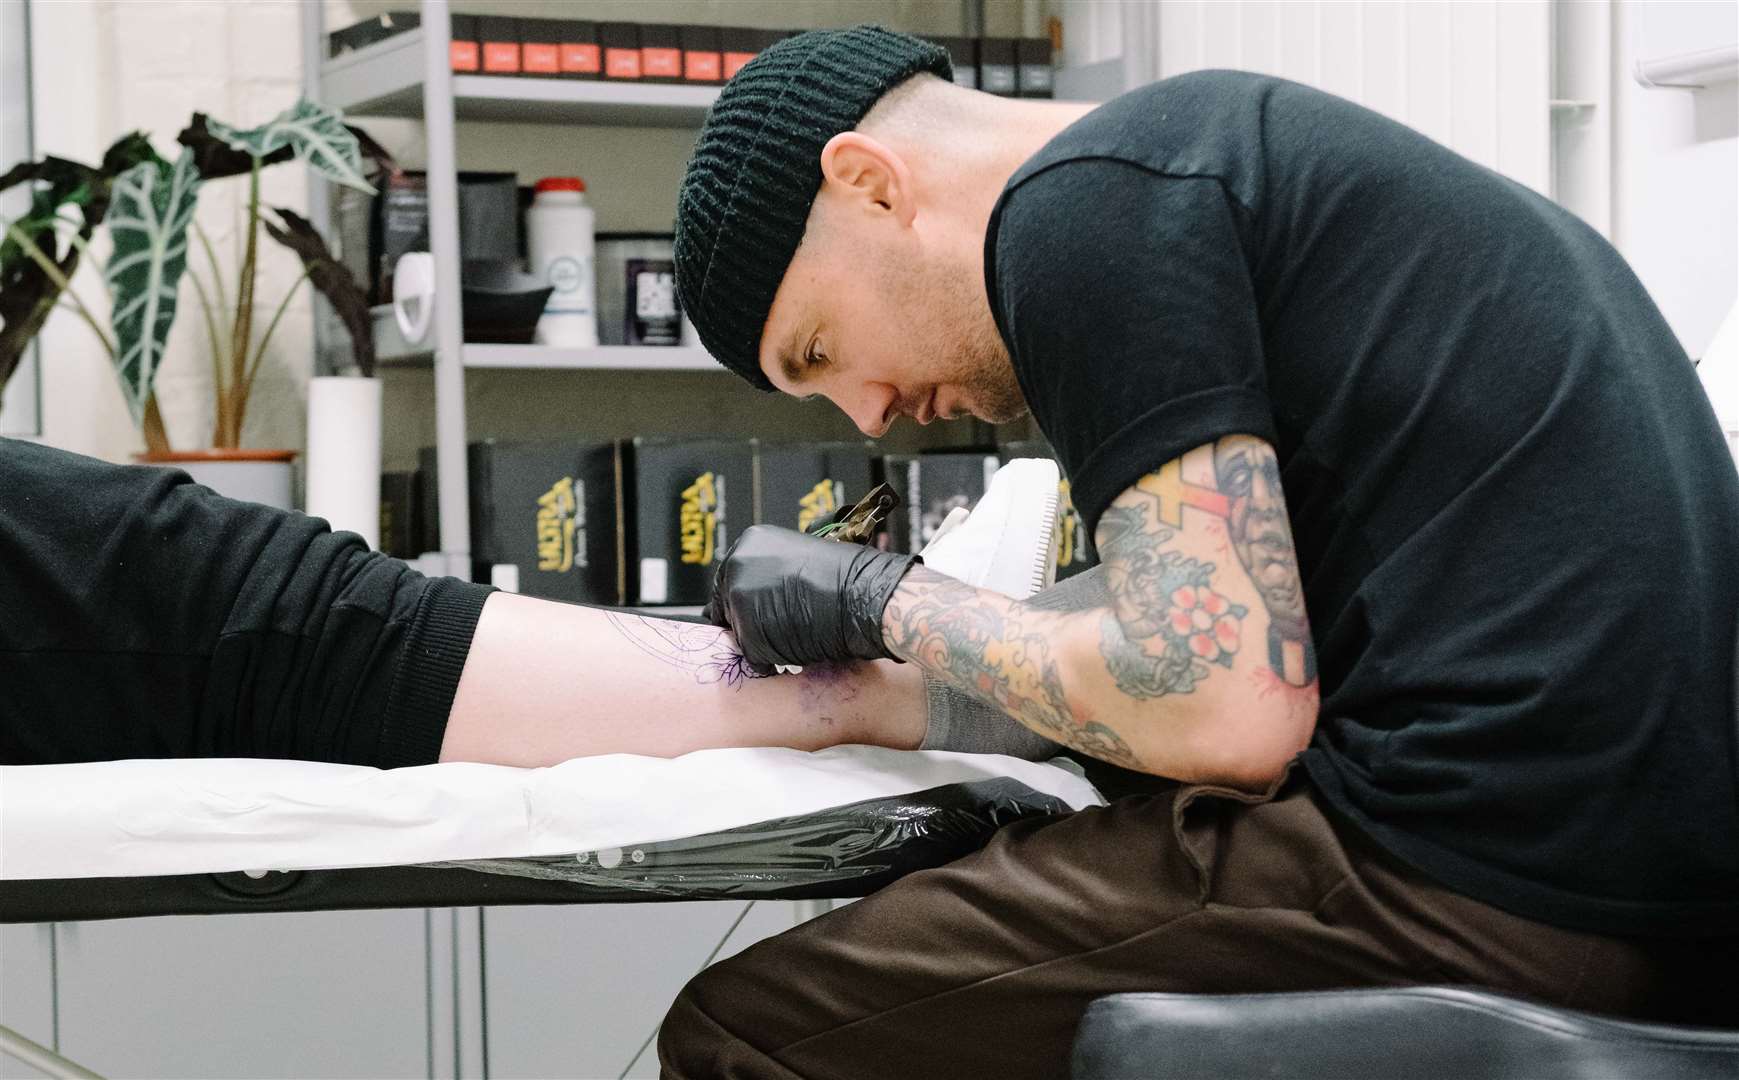 There's no denying the talent of tattoo artists...but our columnist remains unconvinced. Picture: Joshua Atkins